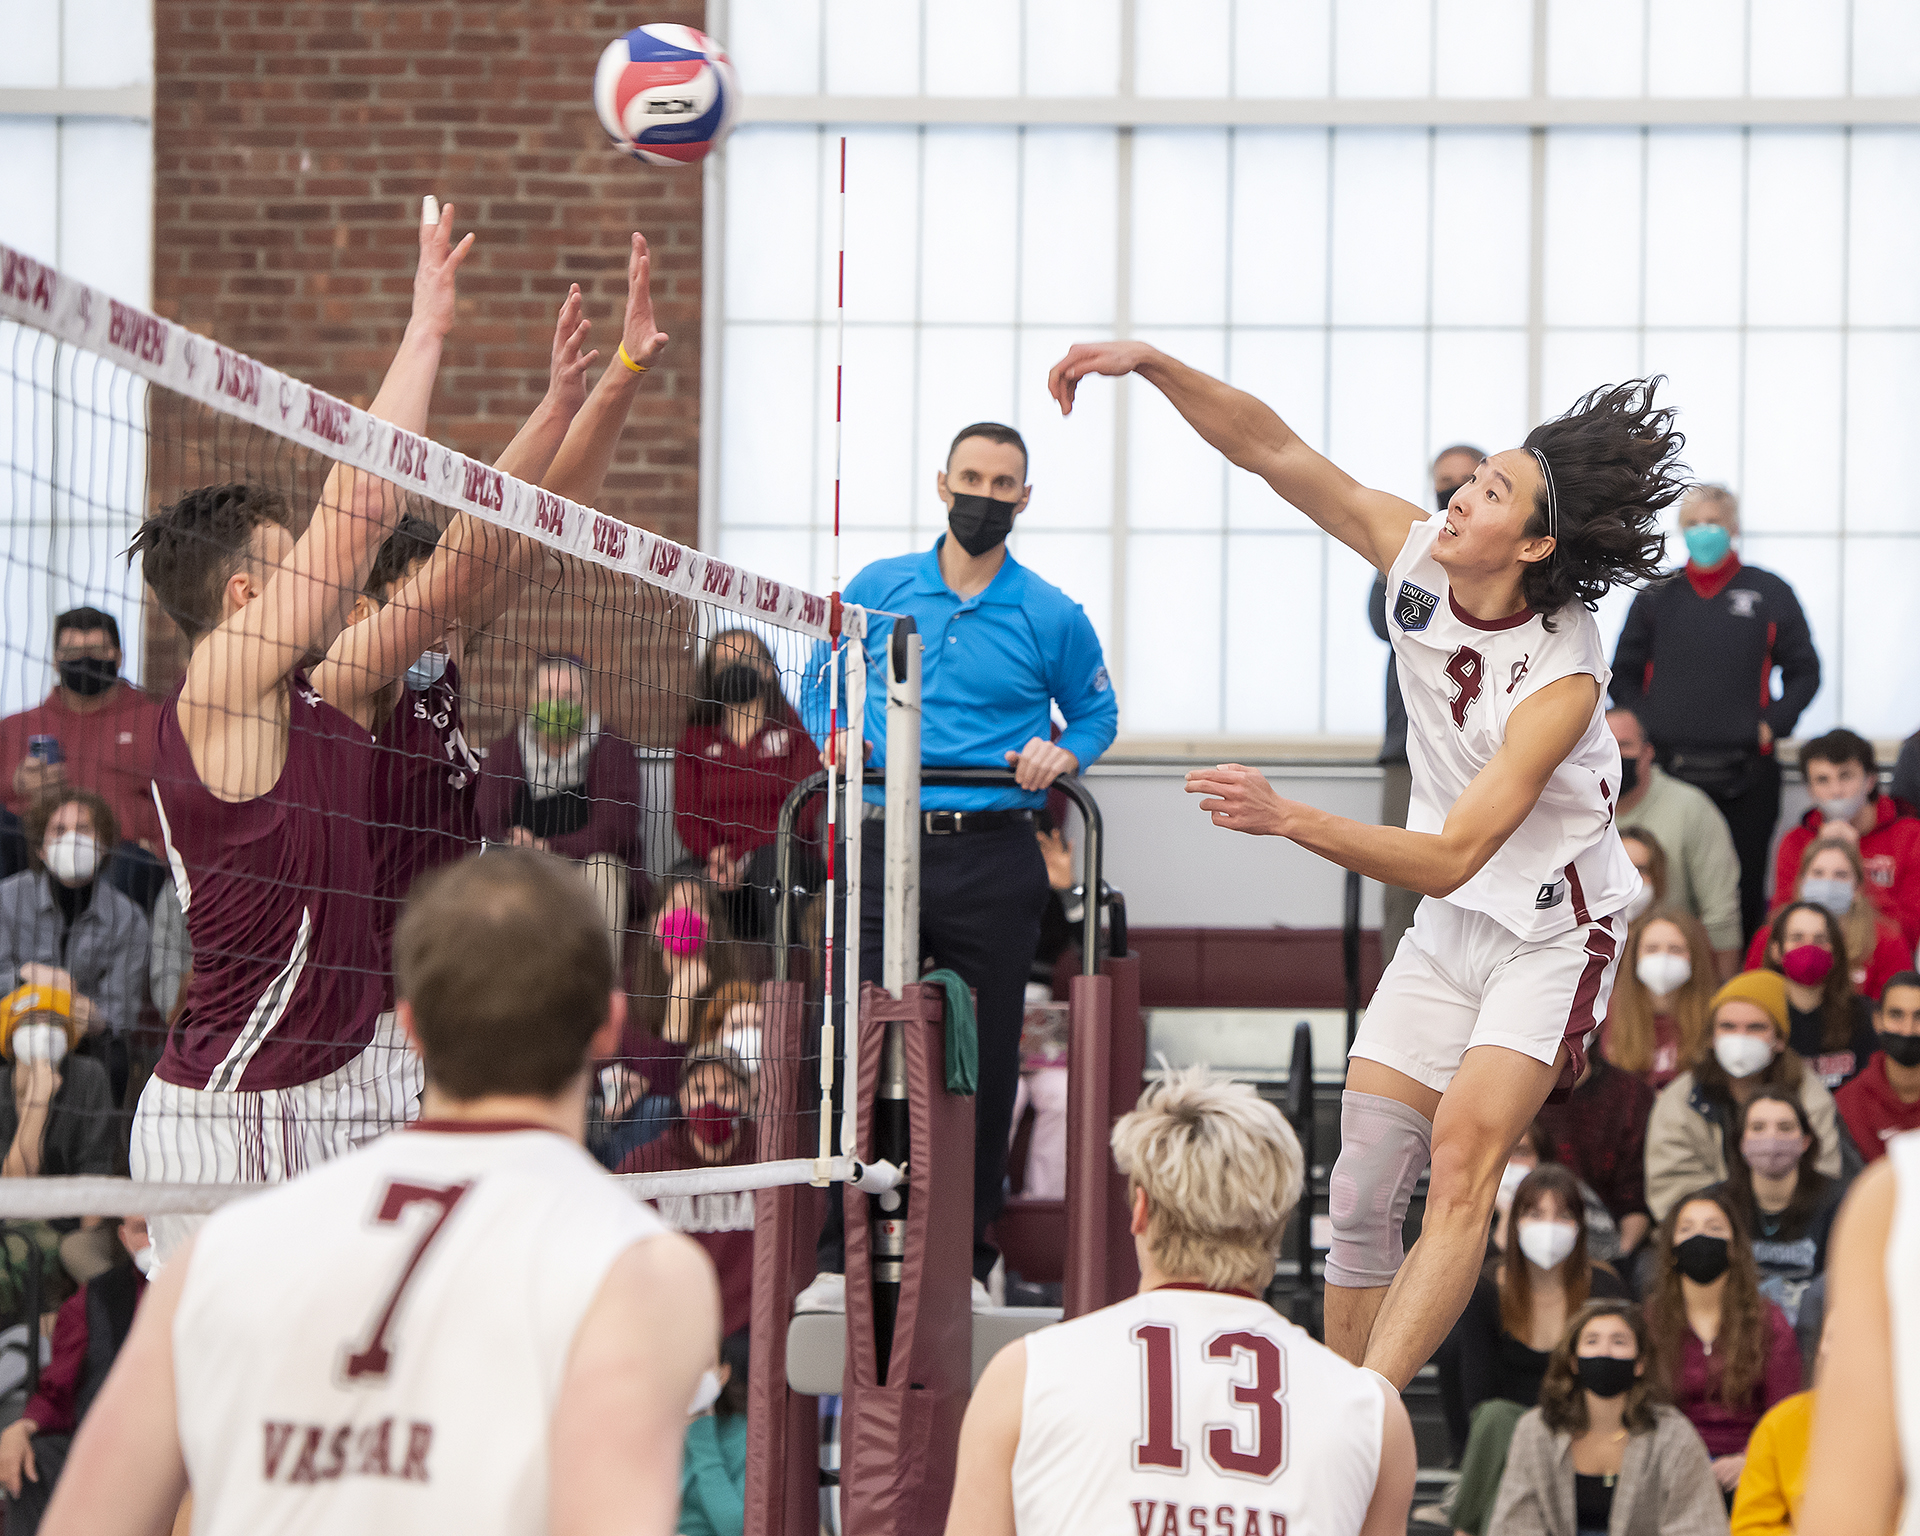 Vassar volleyball player Andrew Kim in action